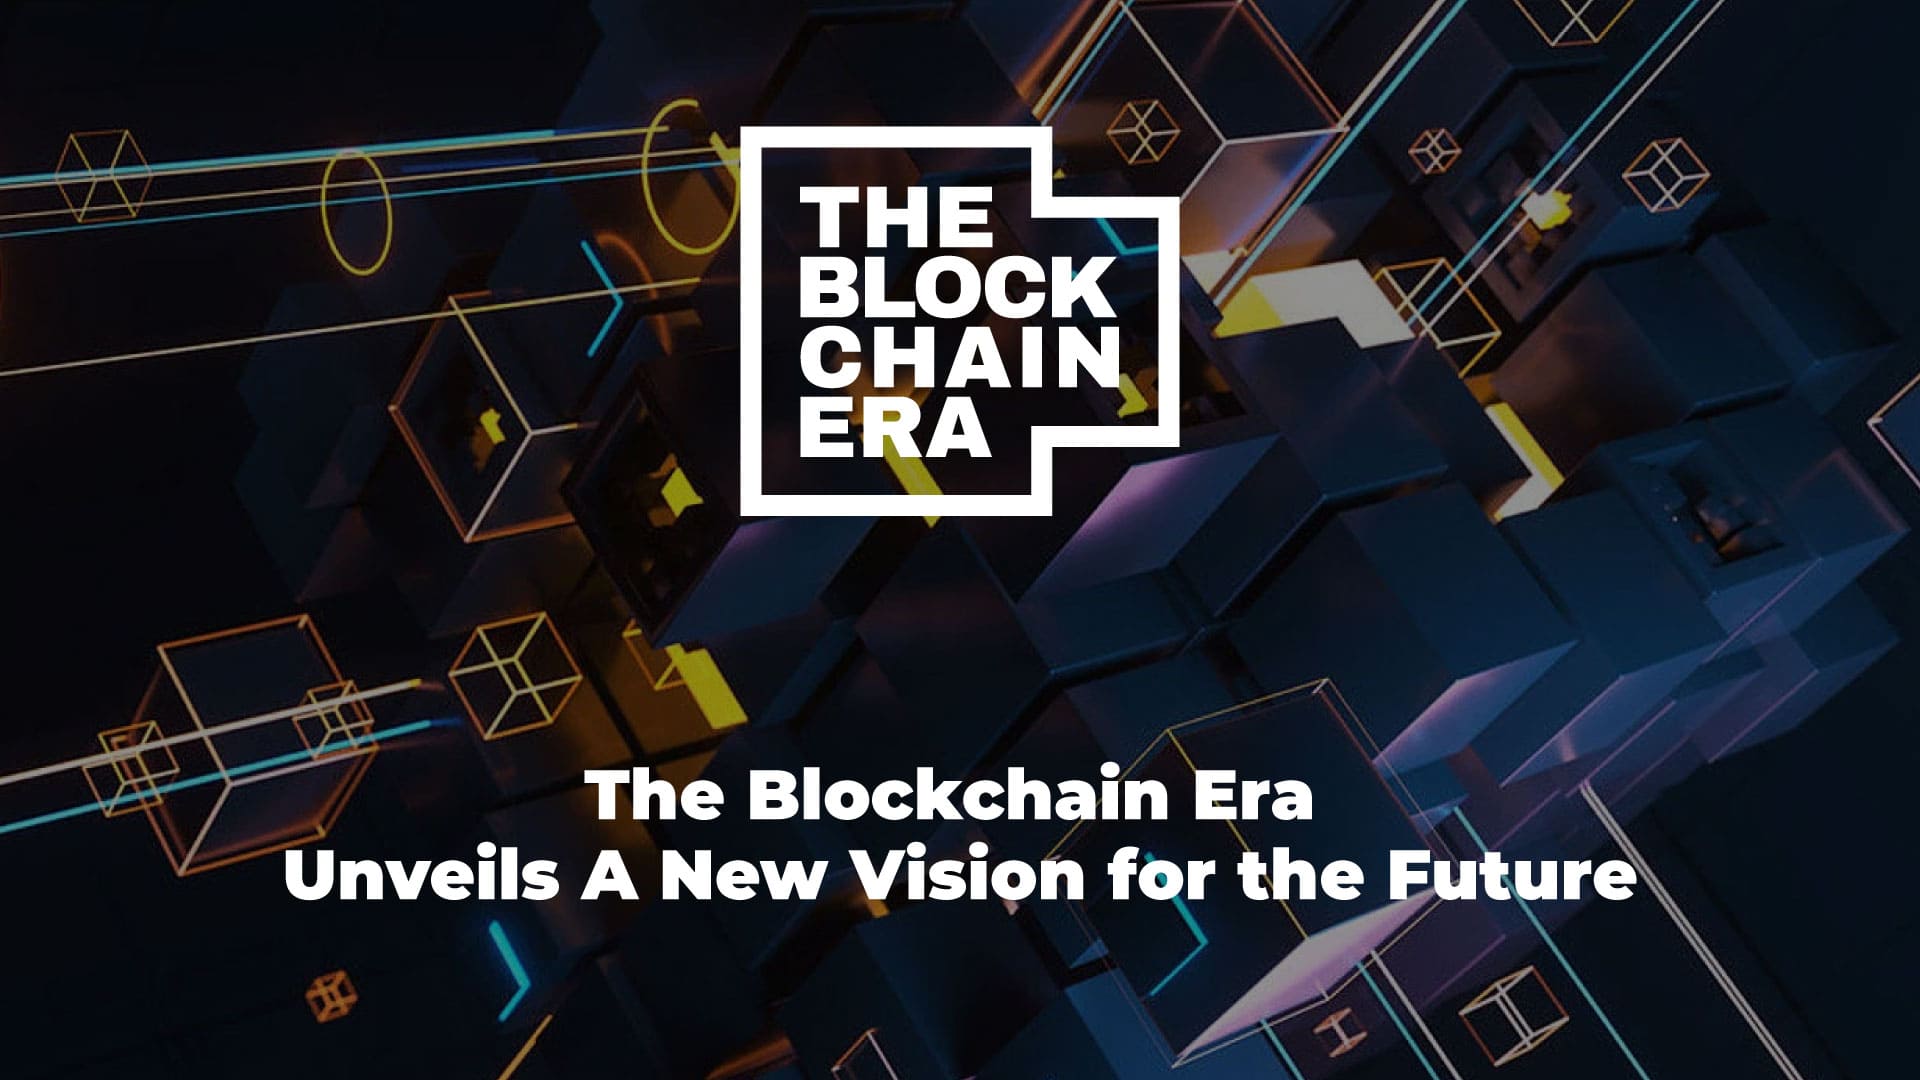 The Blockchain Era Unveils a New Vision for the Future